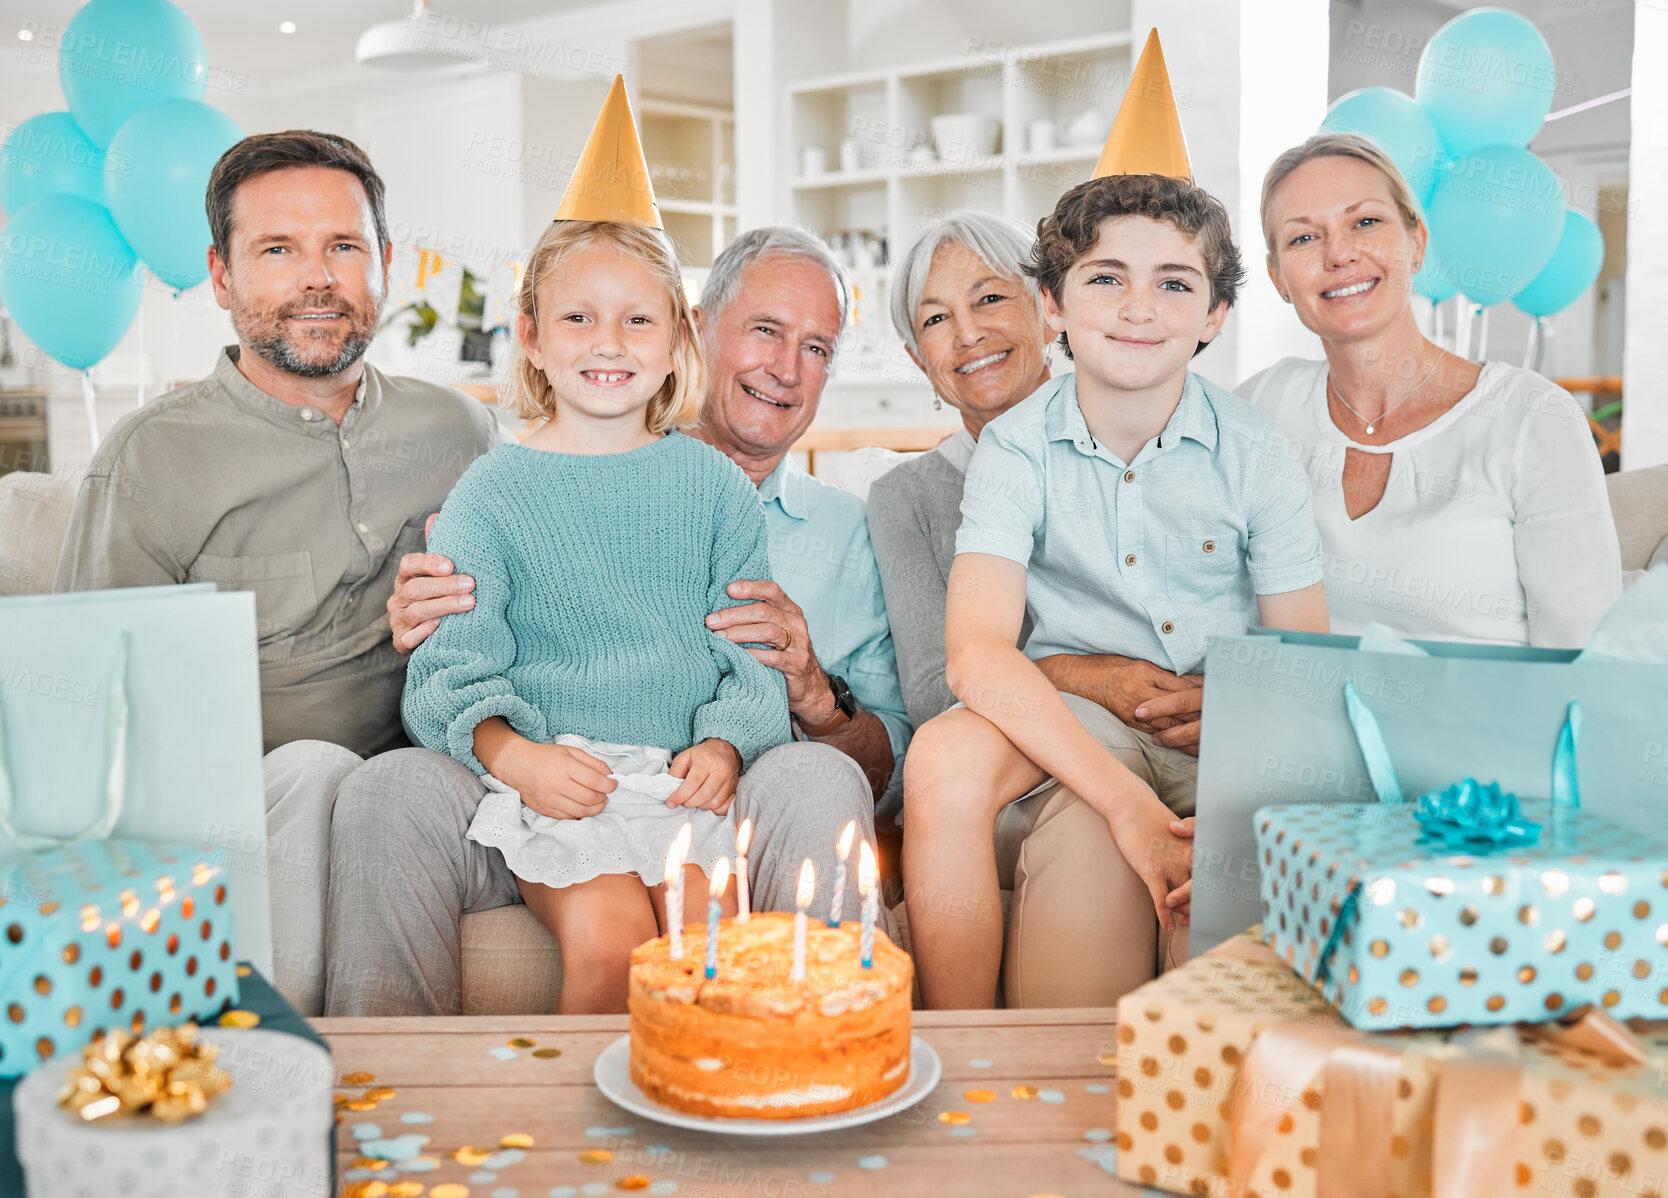 Buy stock photo Cropped portrait of a happy family celebrating a birthday together at home